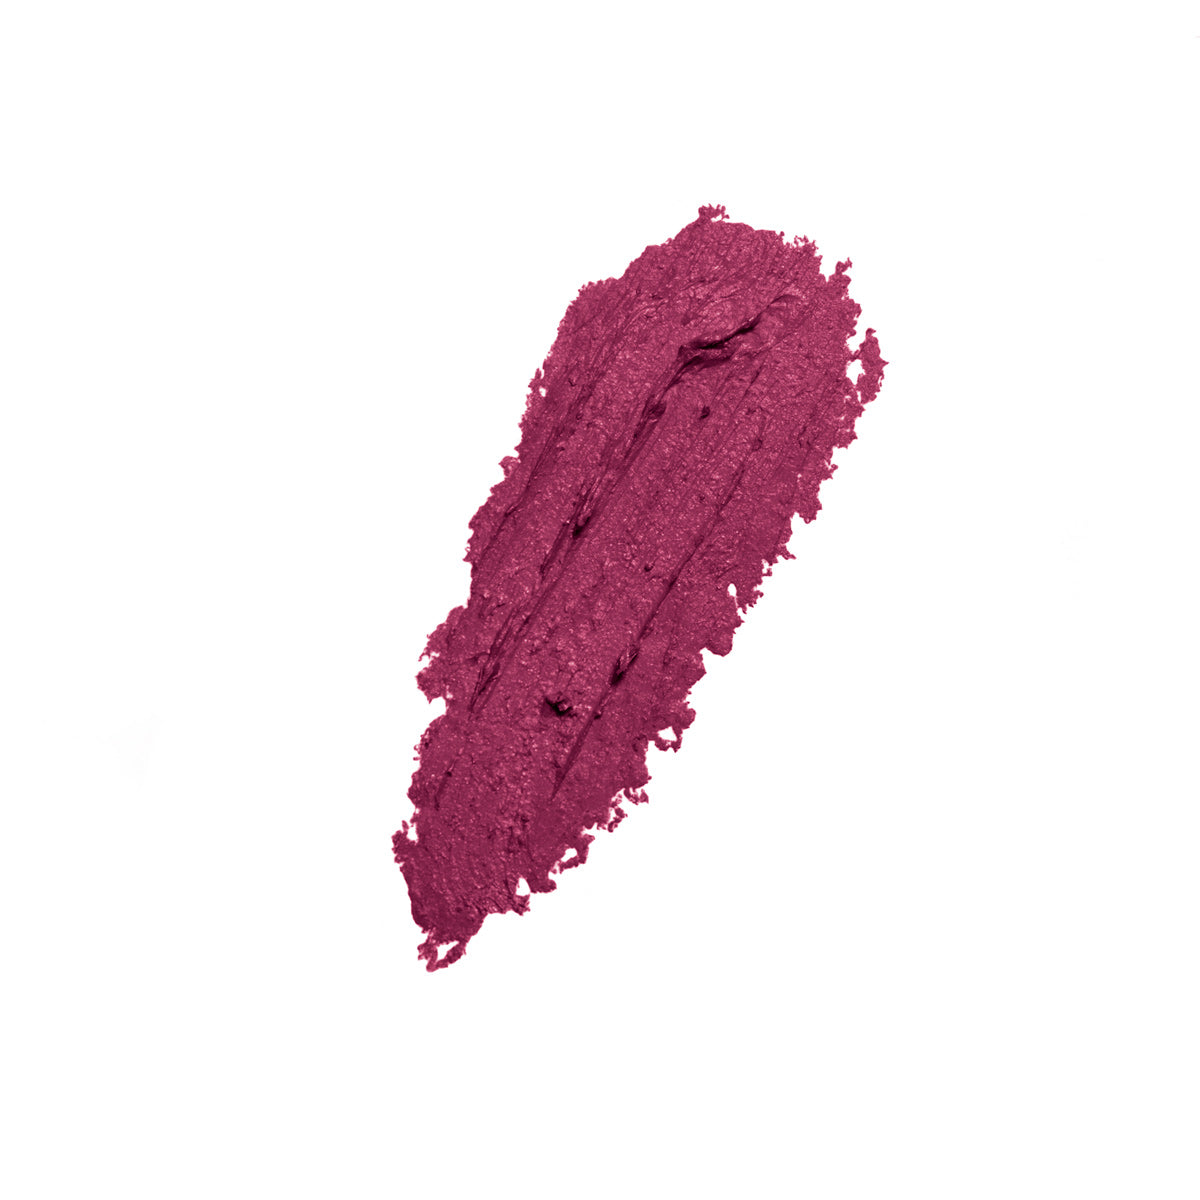 SEDUCTRICE - DEEP BLUE RED - long-wearing matte finish lipstick in deep blue red shade